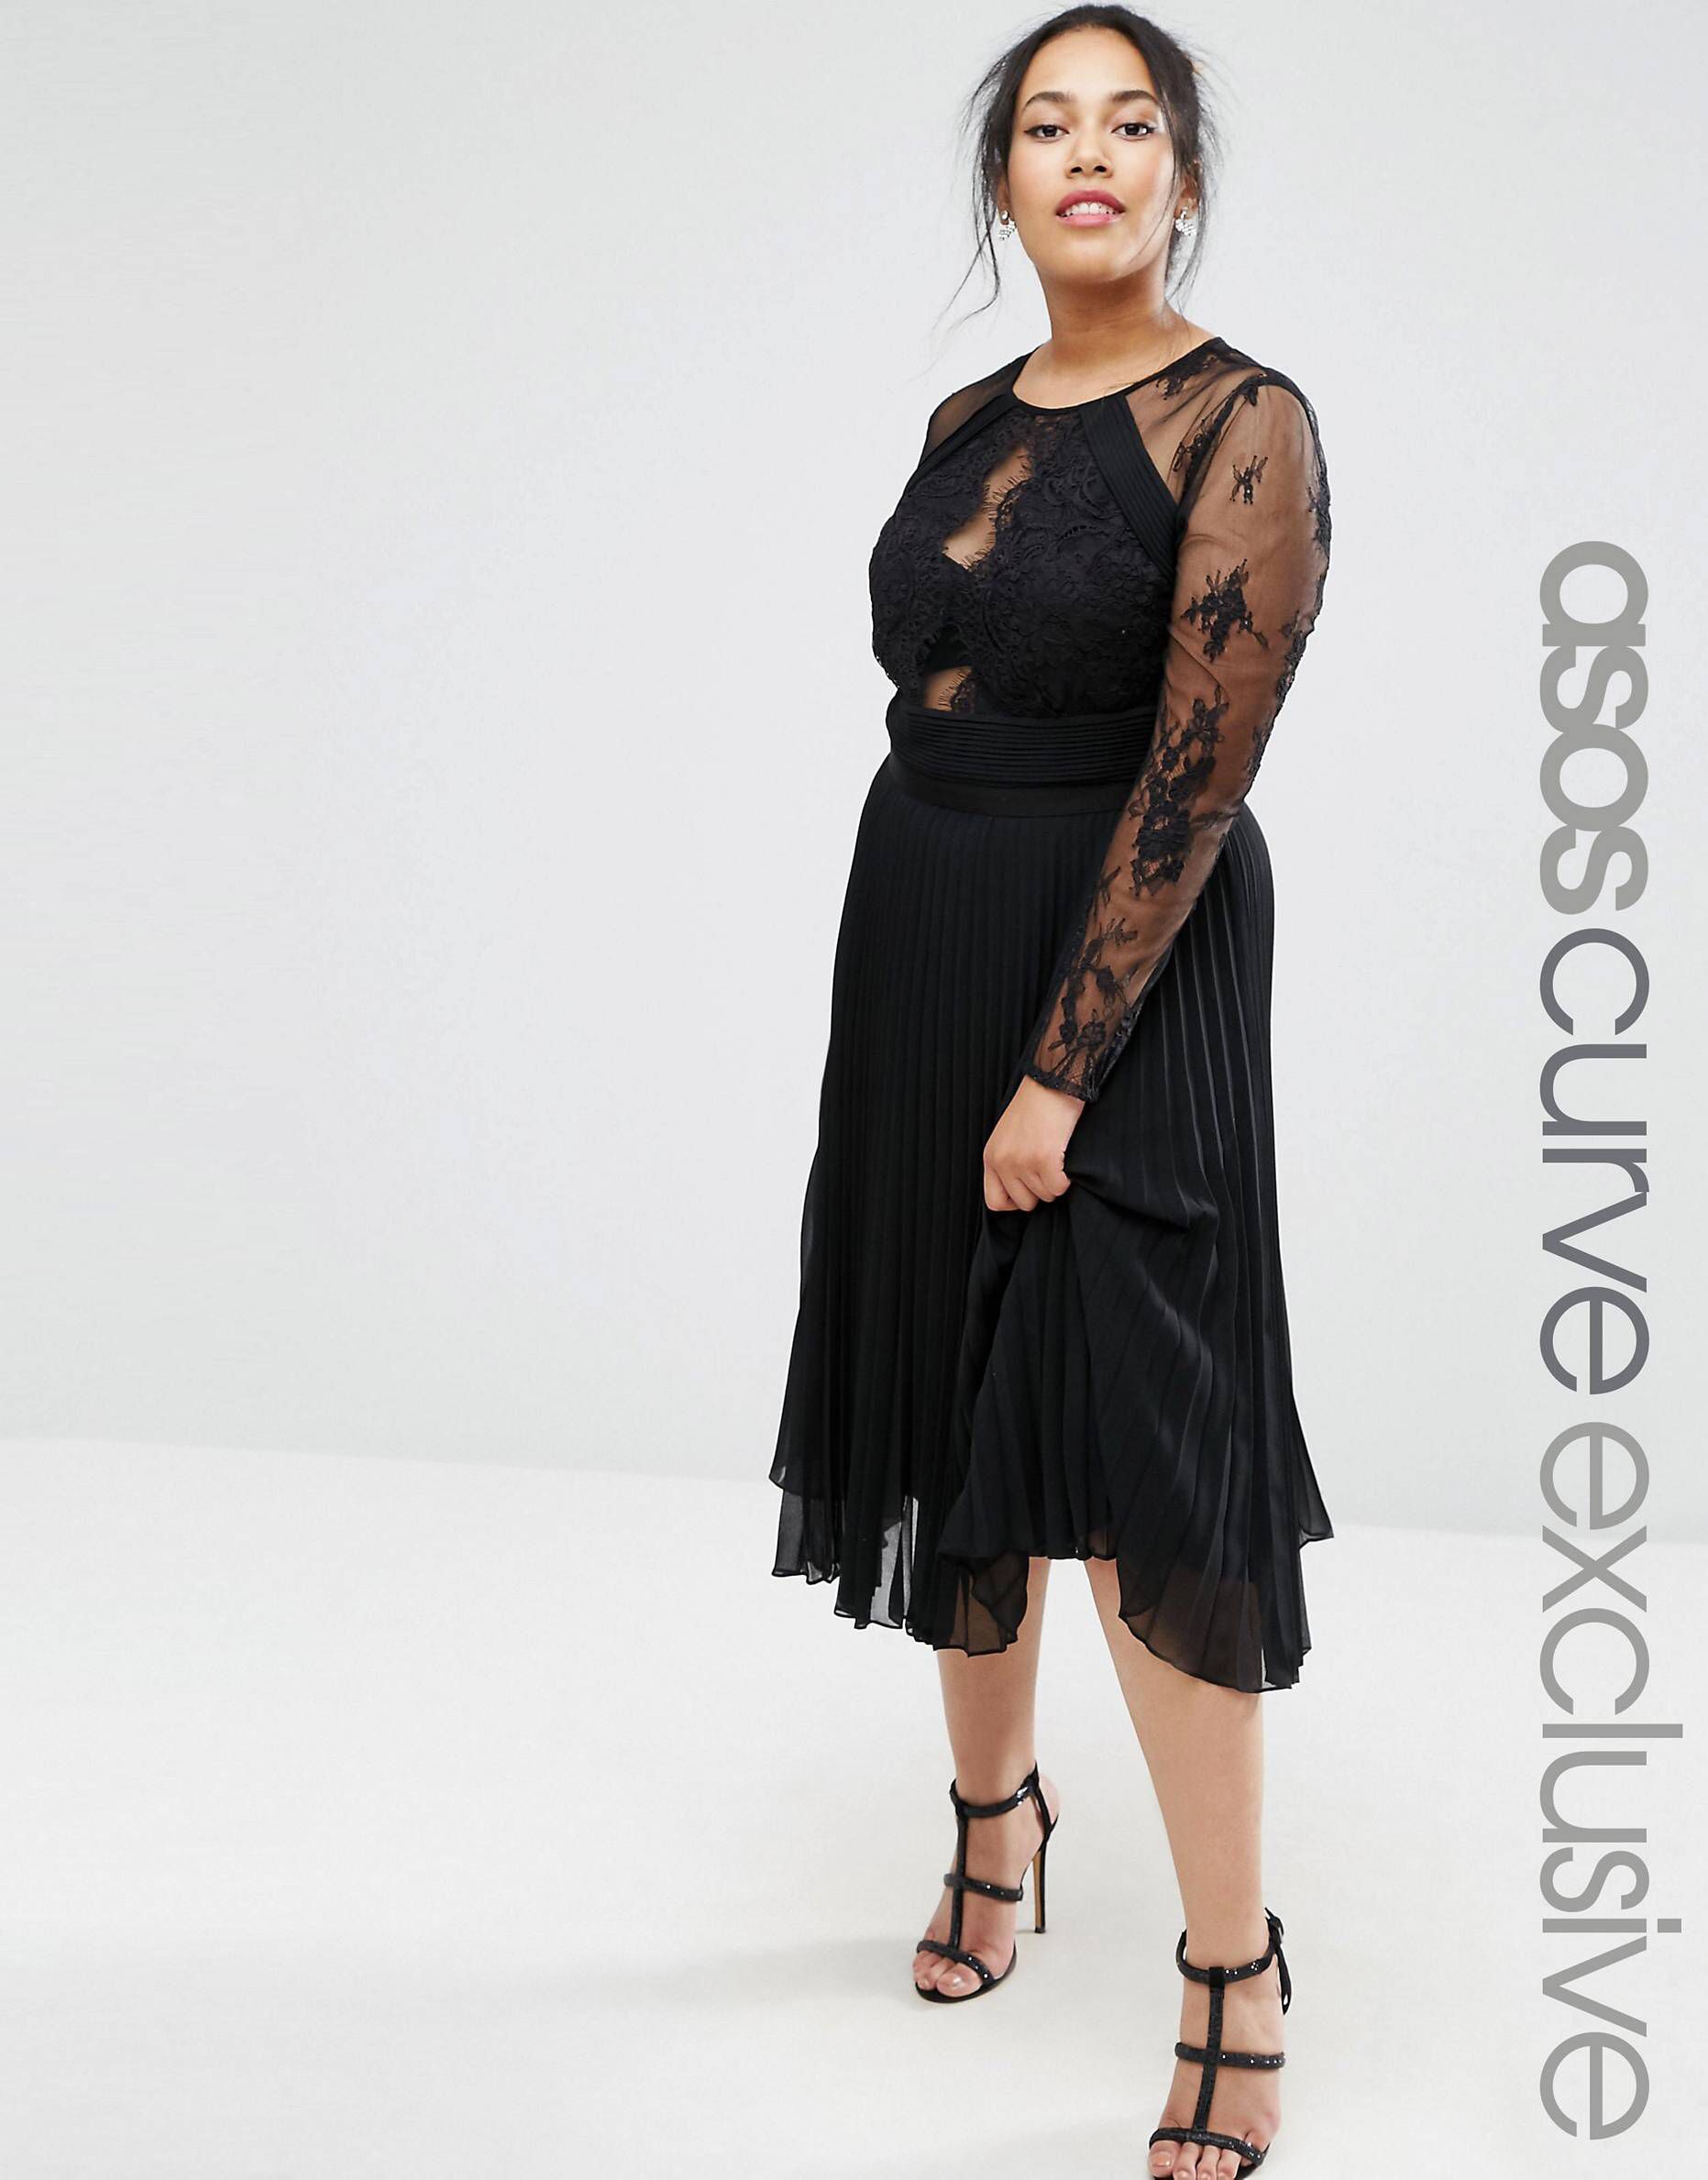 ASOS CURVE Pretty Lace Eyelash Pleated Midi Dress | ASOS Lovely Cocktail Dress For Plus Size Ladies: Plus size outfit,  Cute Cocktail Dress,  Cocktail Outfits Summer,  Cocktail Party Outfits,  Girls Outfit Plus-Size,  Plus Size Cocktail Attire,  Plus Size Party Outfits,  Cocktail Party Plus-Size  